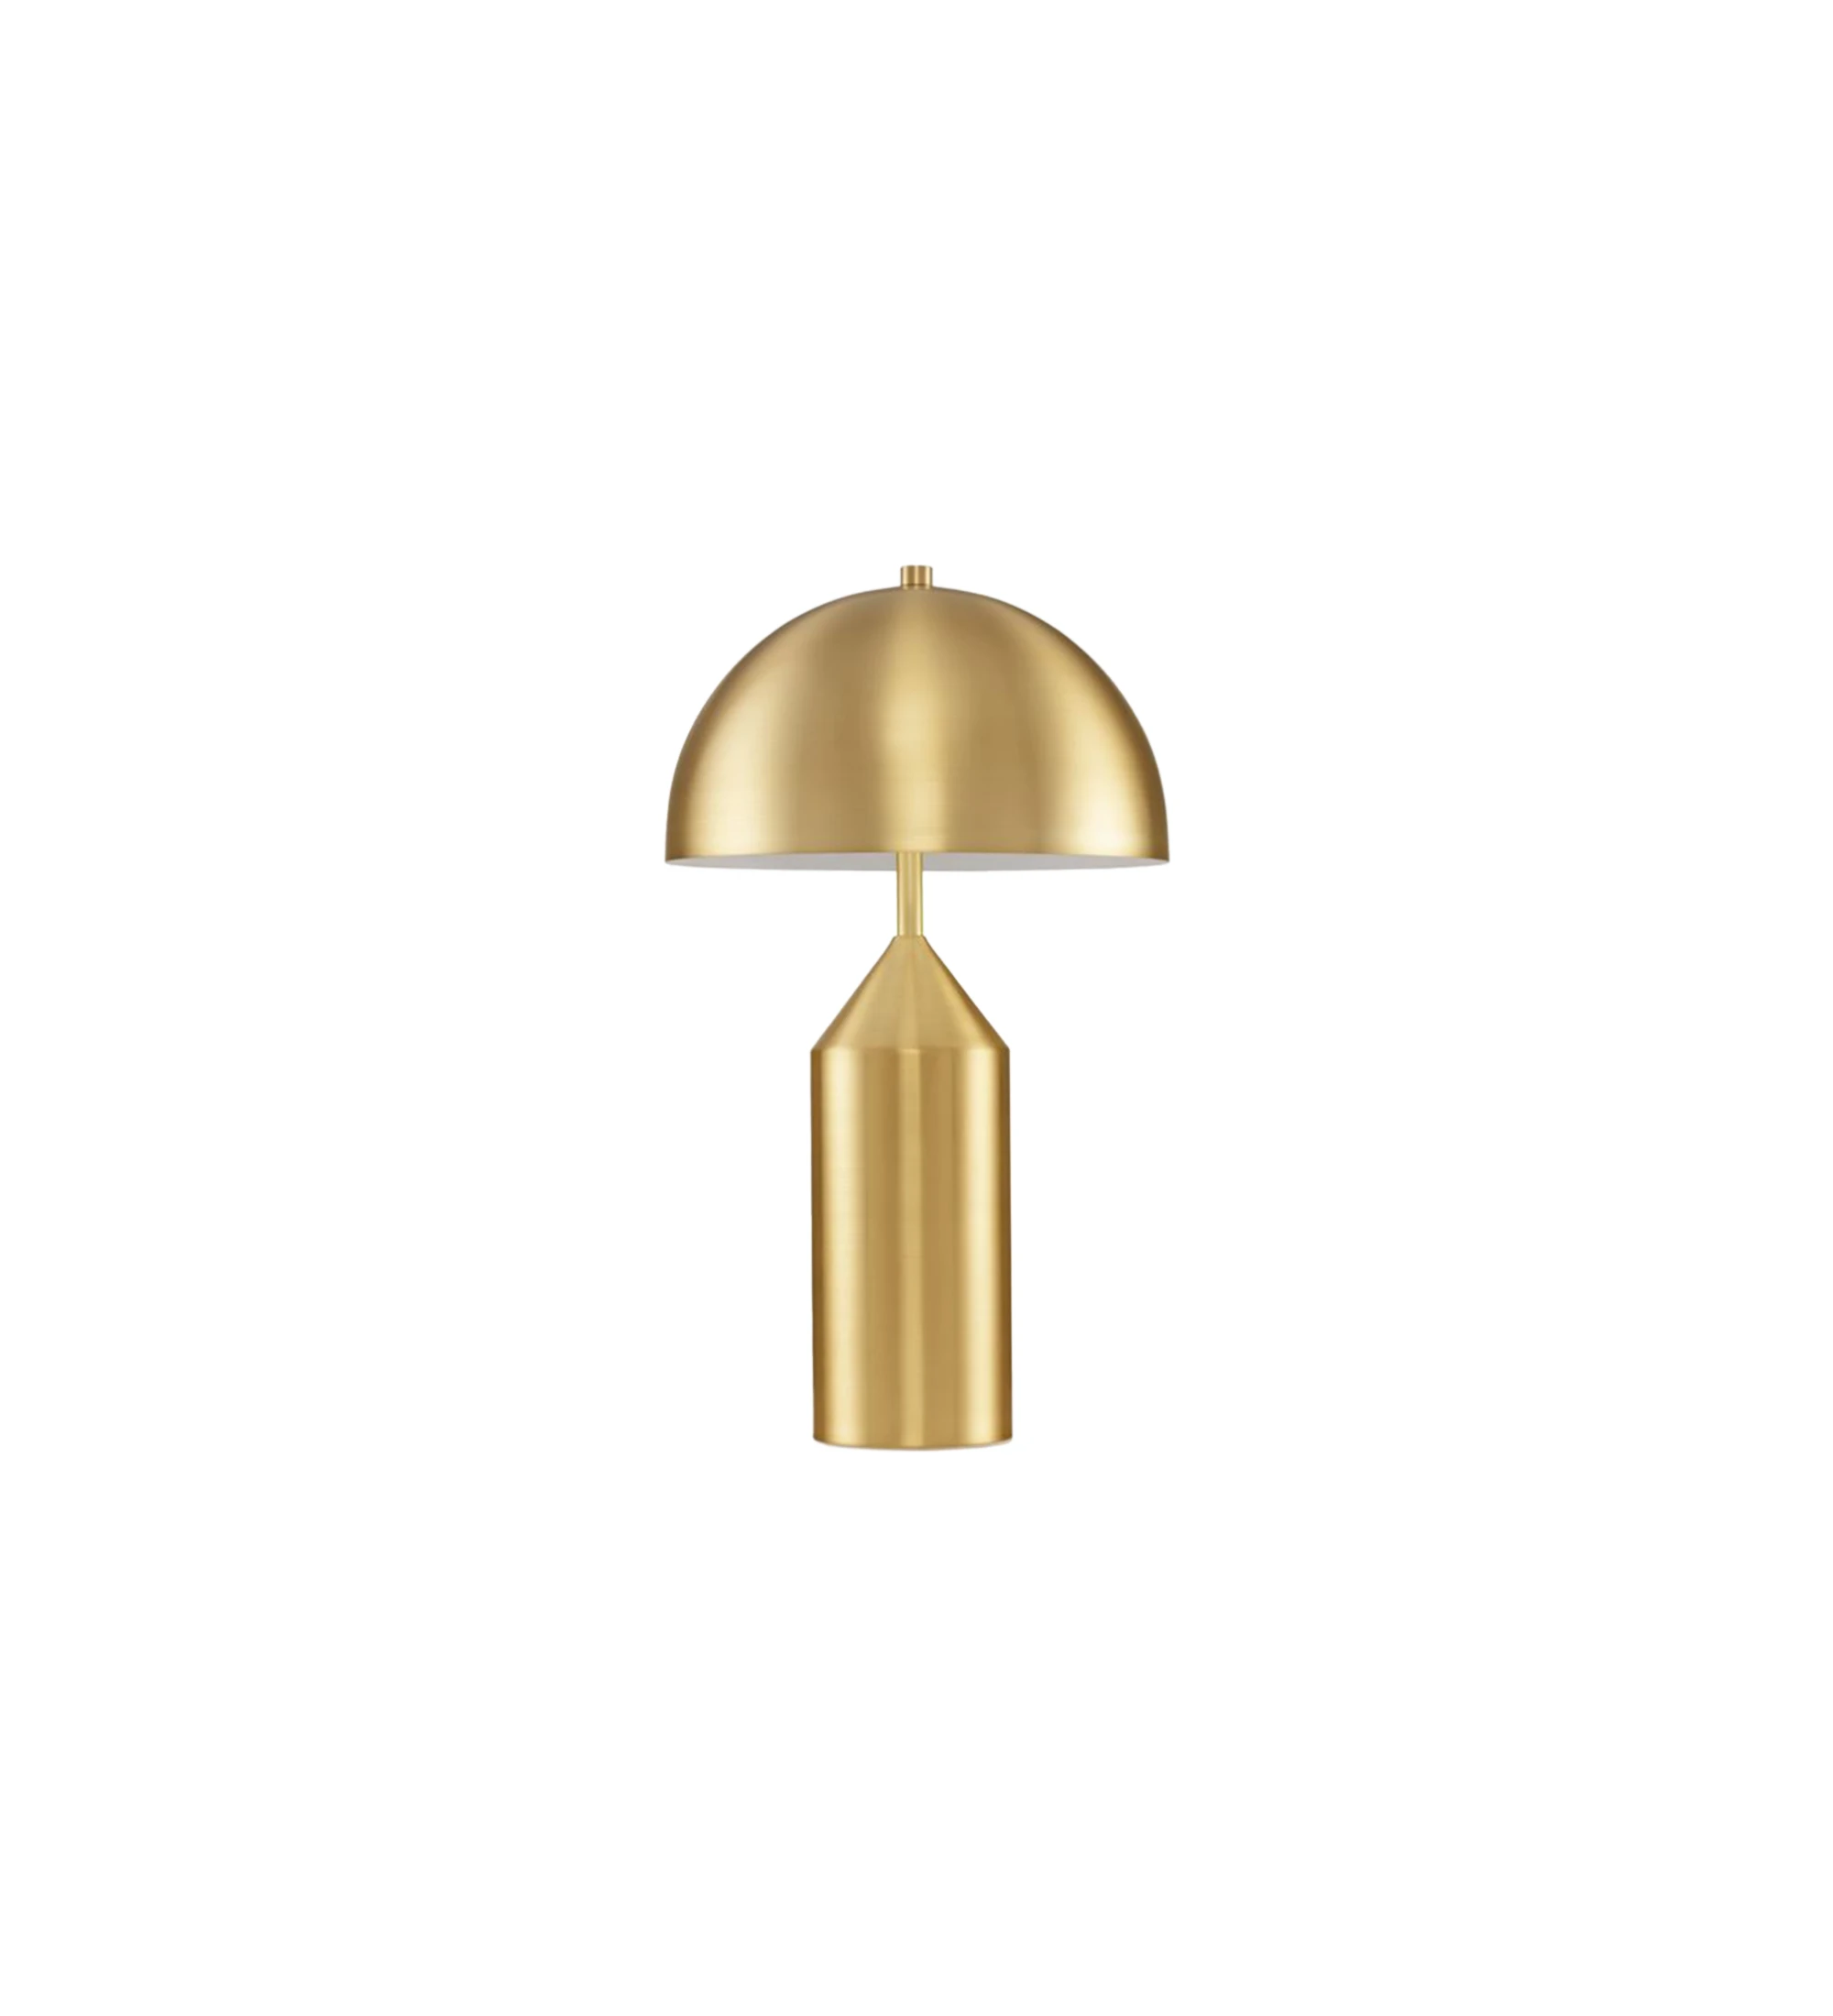  Table lamp with golden metal base and golden brass shade.